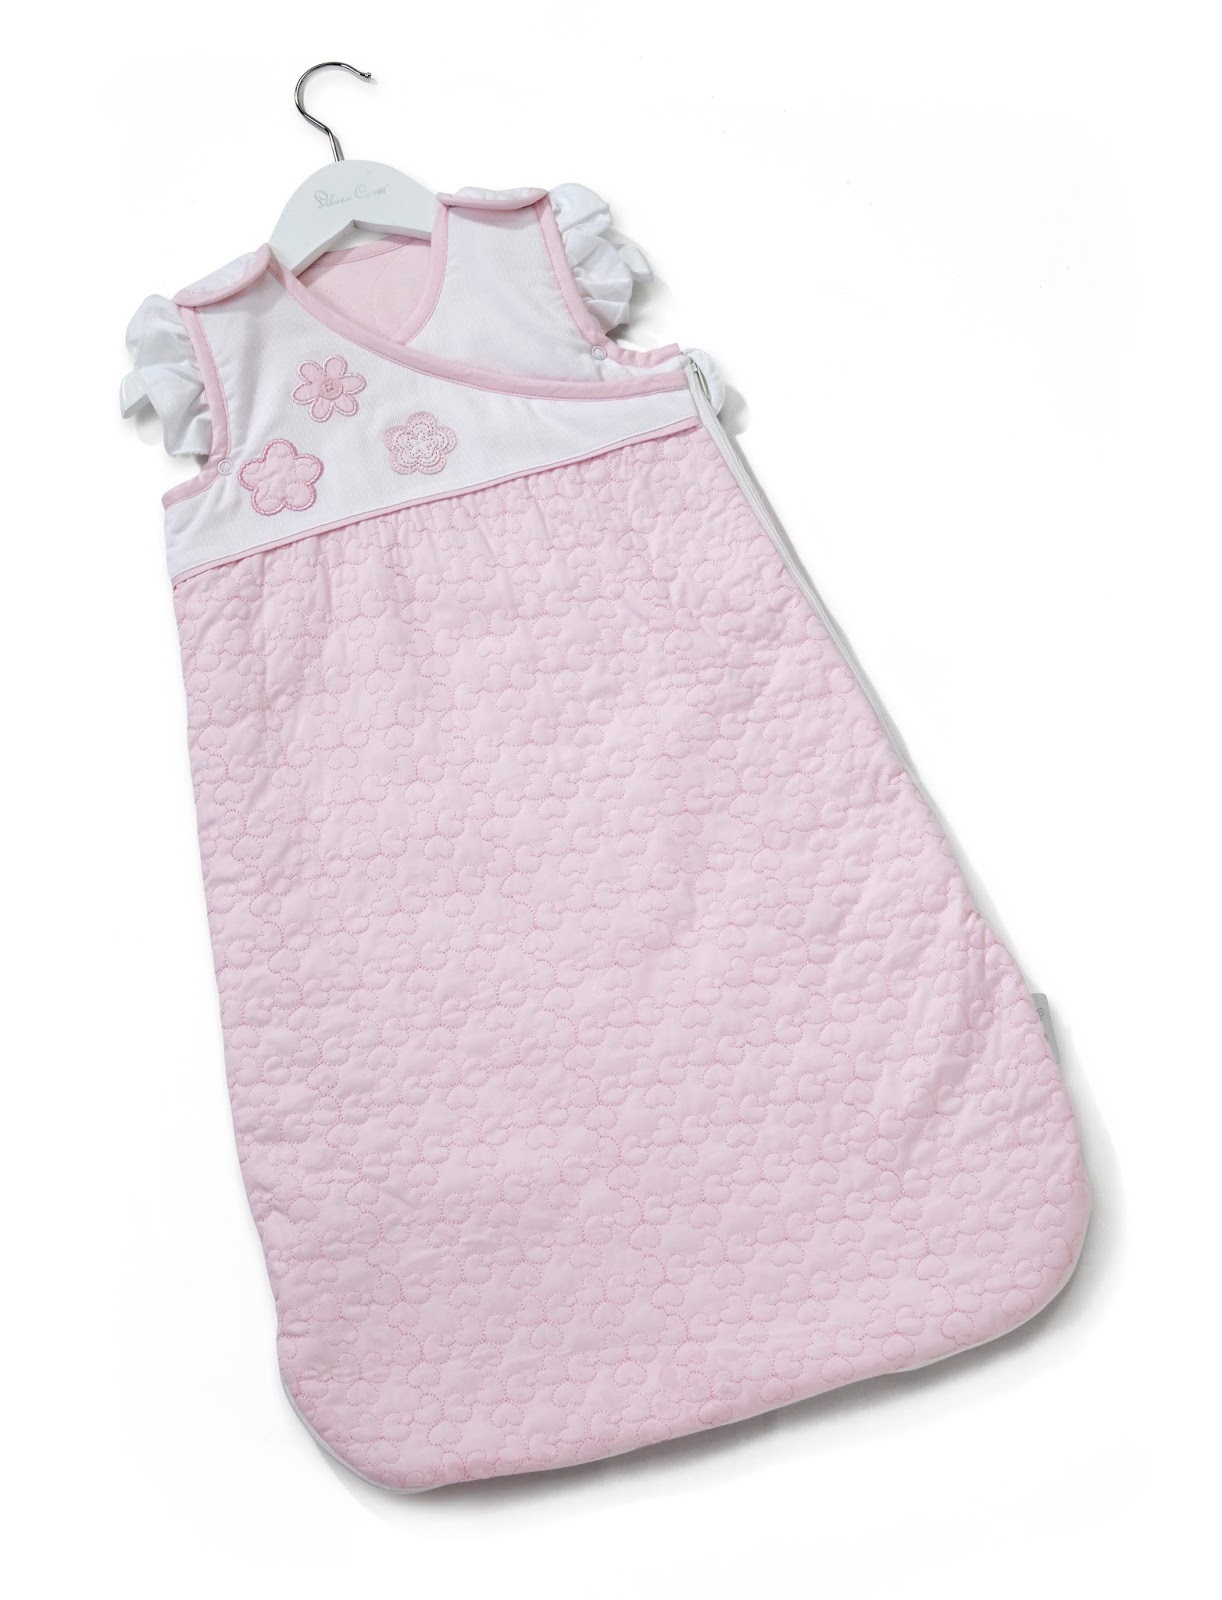 Silver Cross Sleepsuit Royal Baby Gift Guide